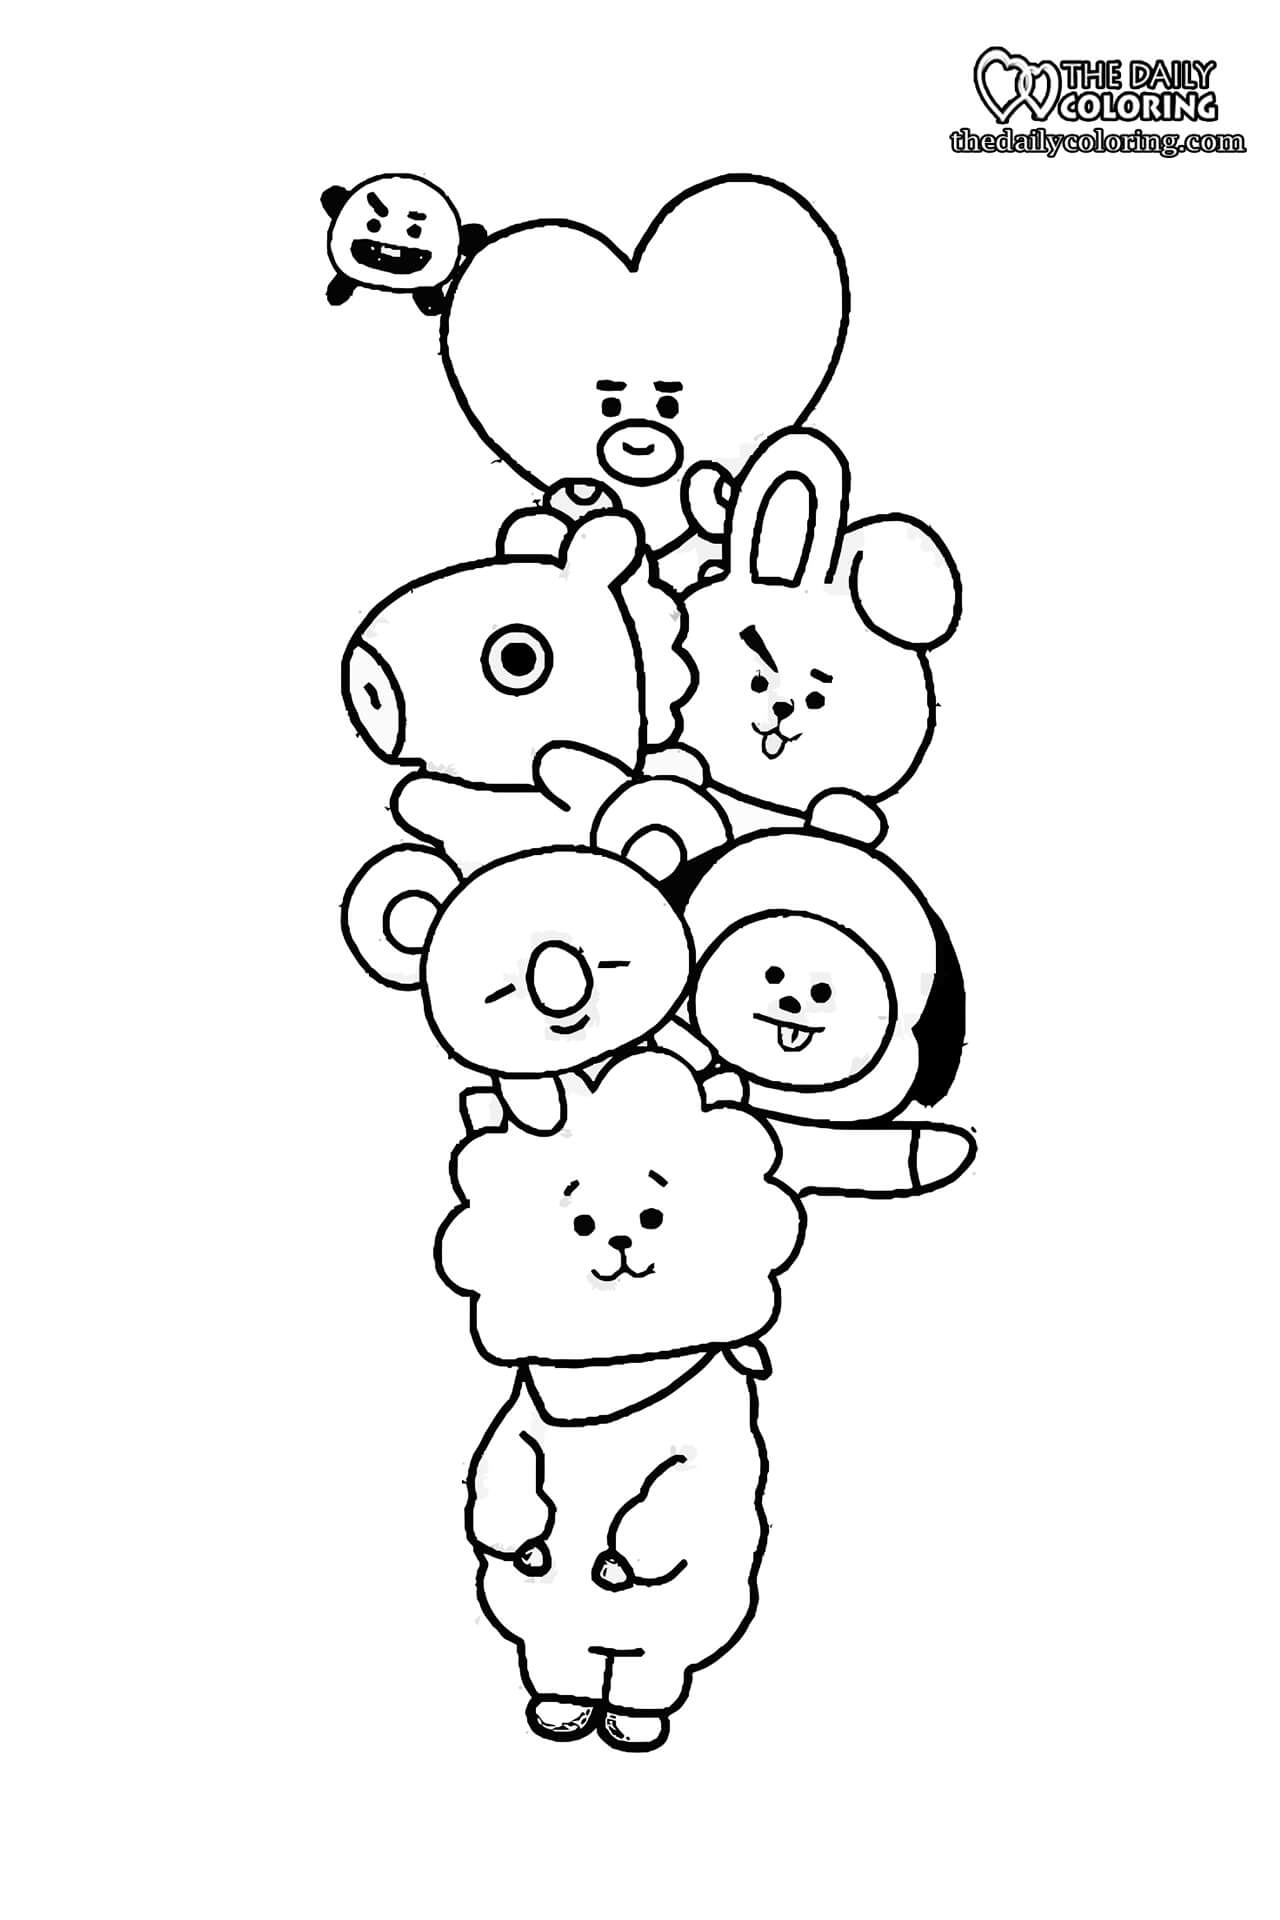 bt21-new-coloring-page